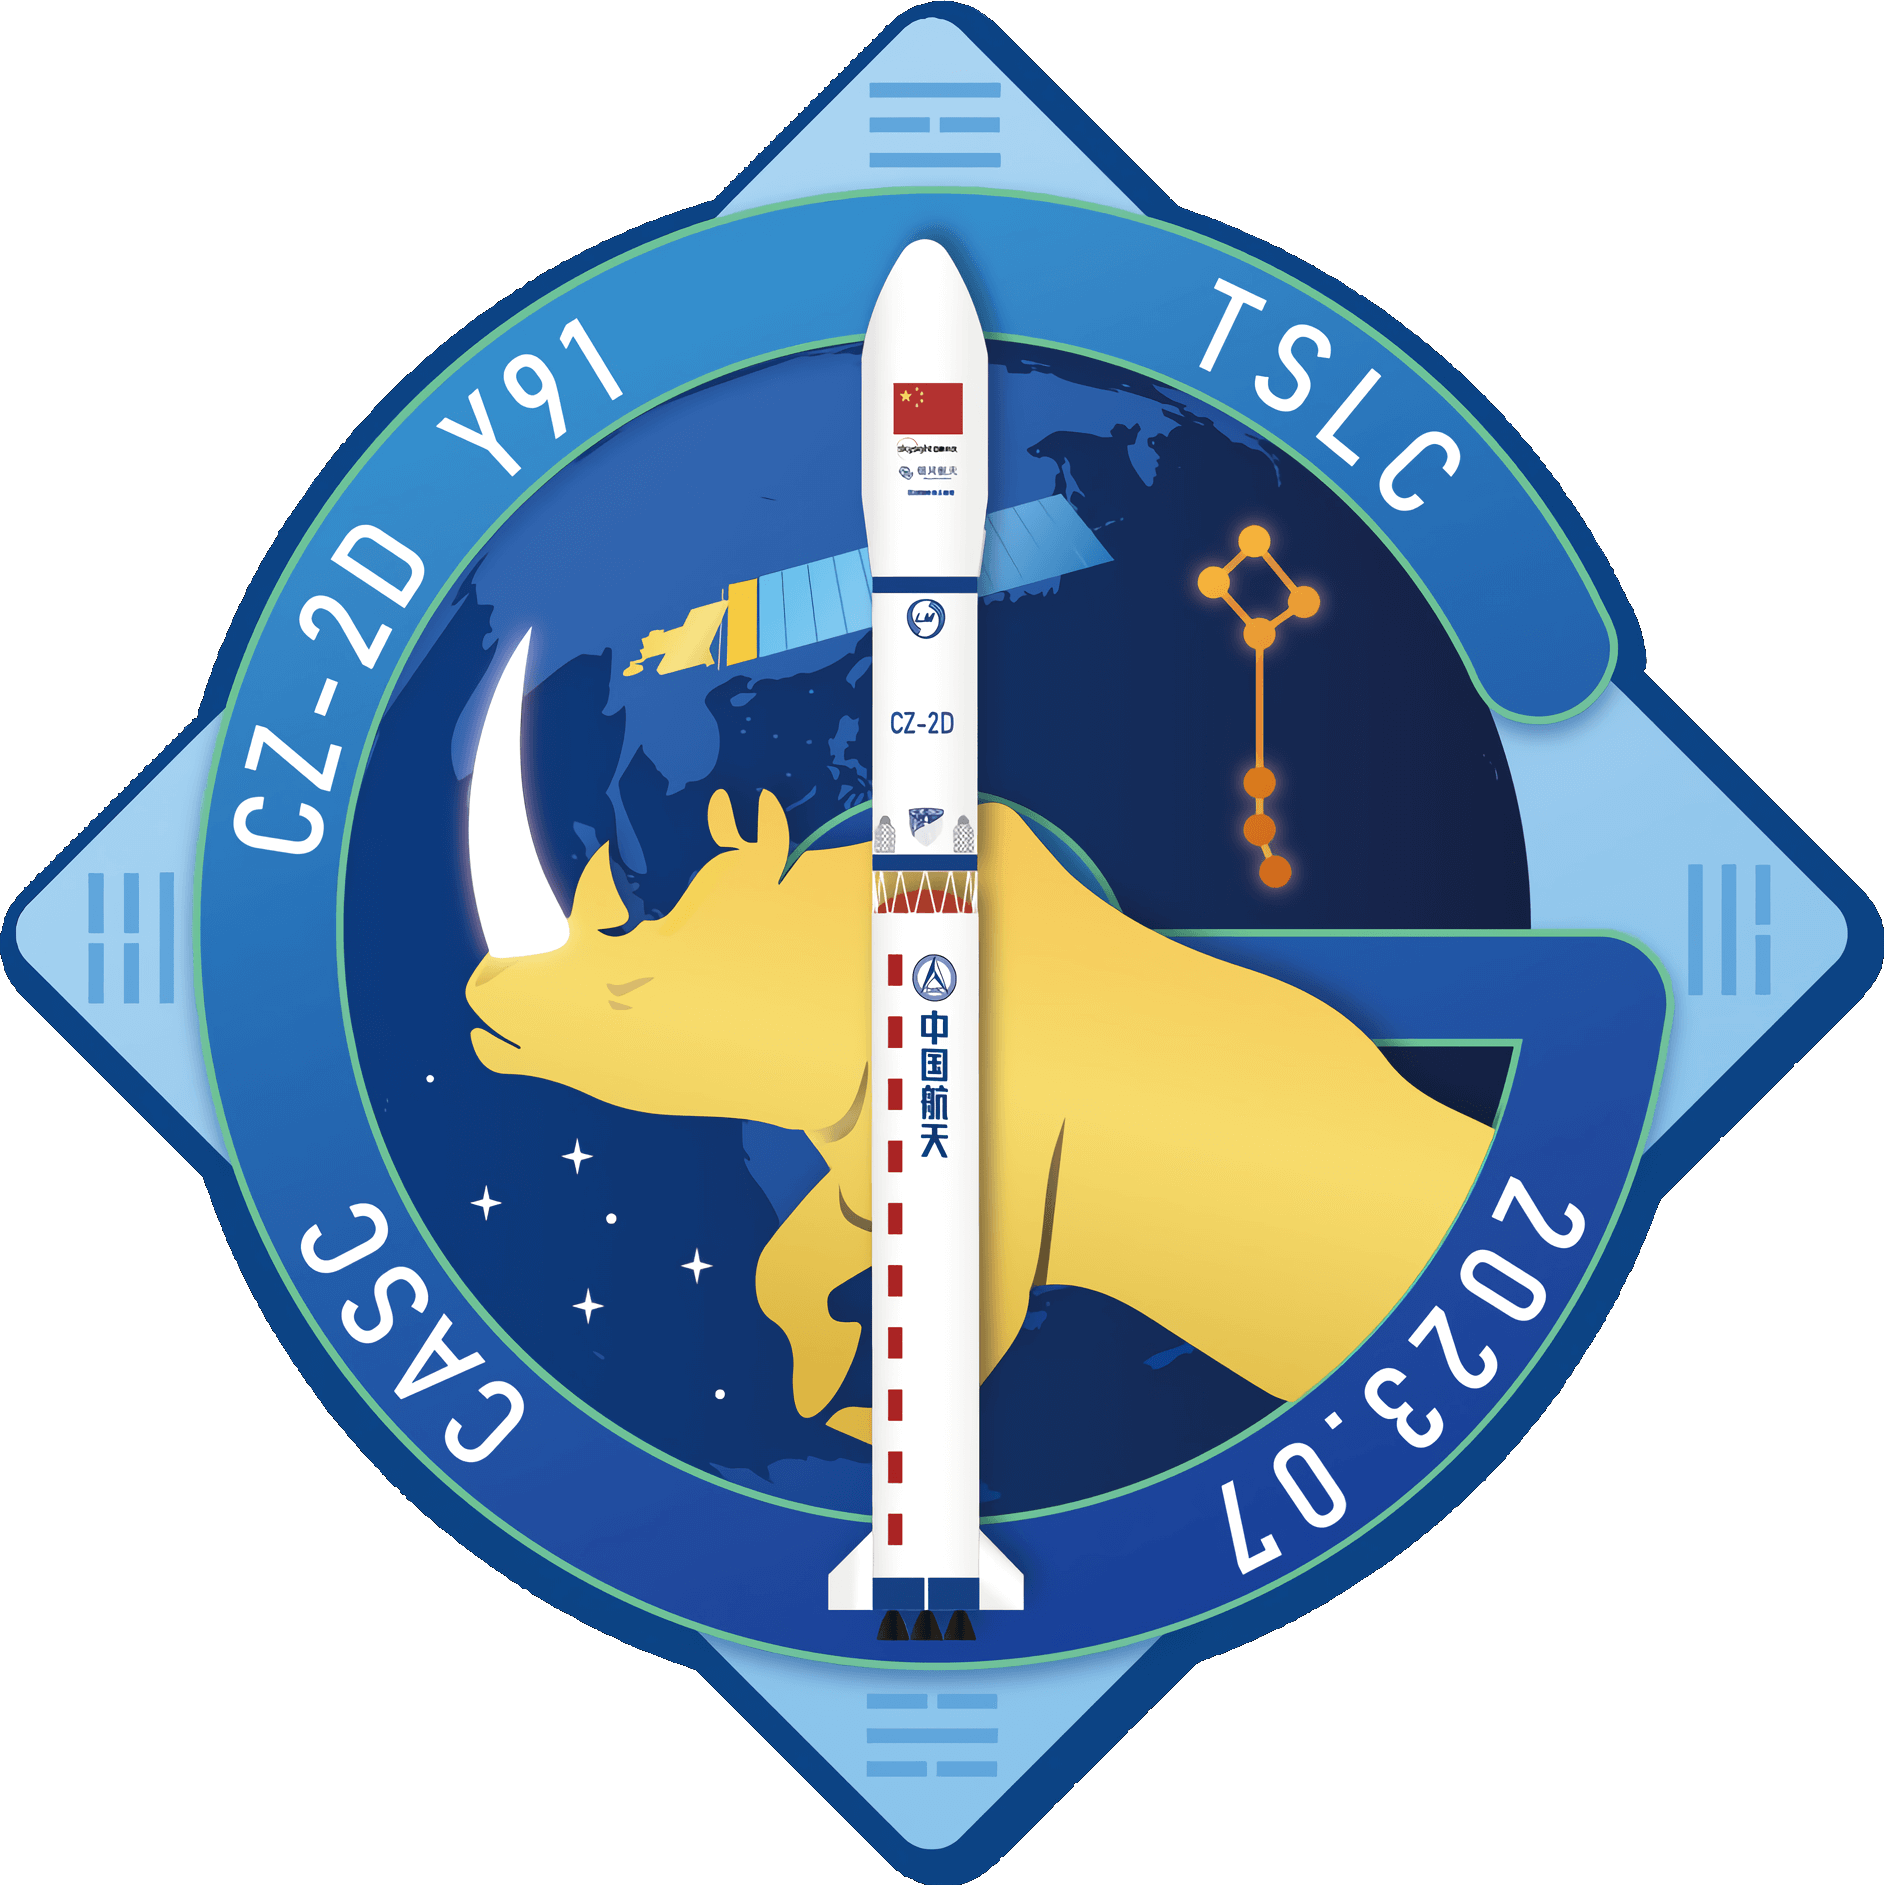 Mission patch for Skysight AS-01 to 03 & Lingxi-03